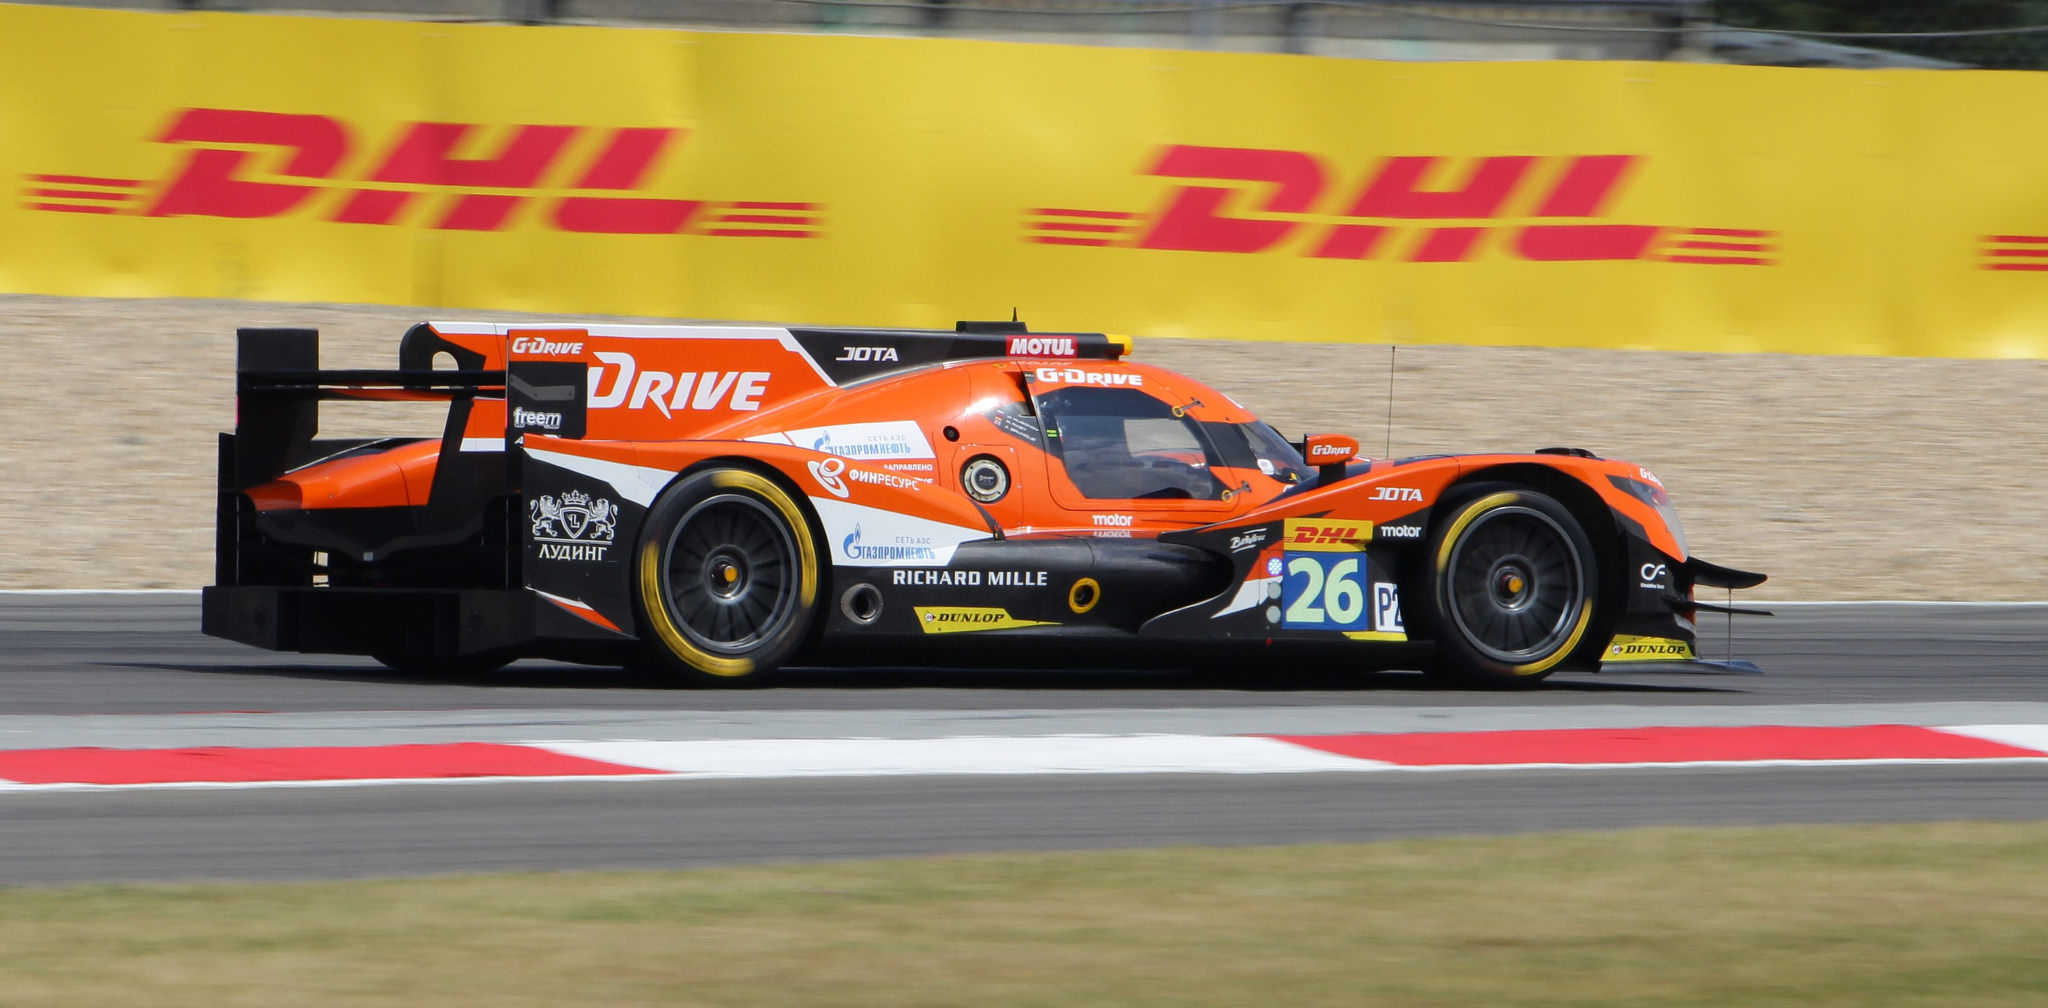 More driver reshuffling in LMP2